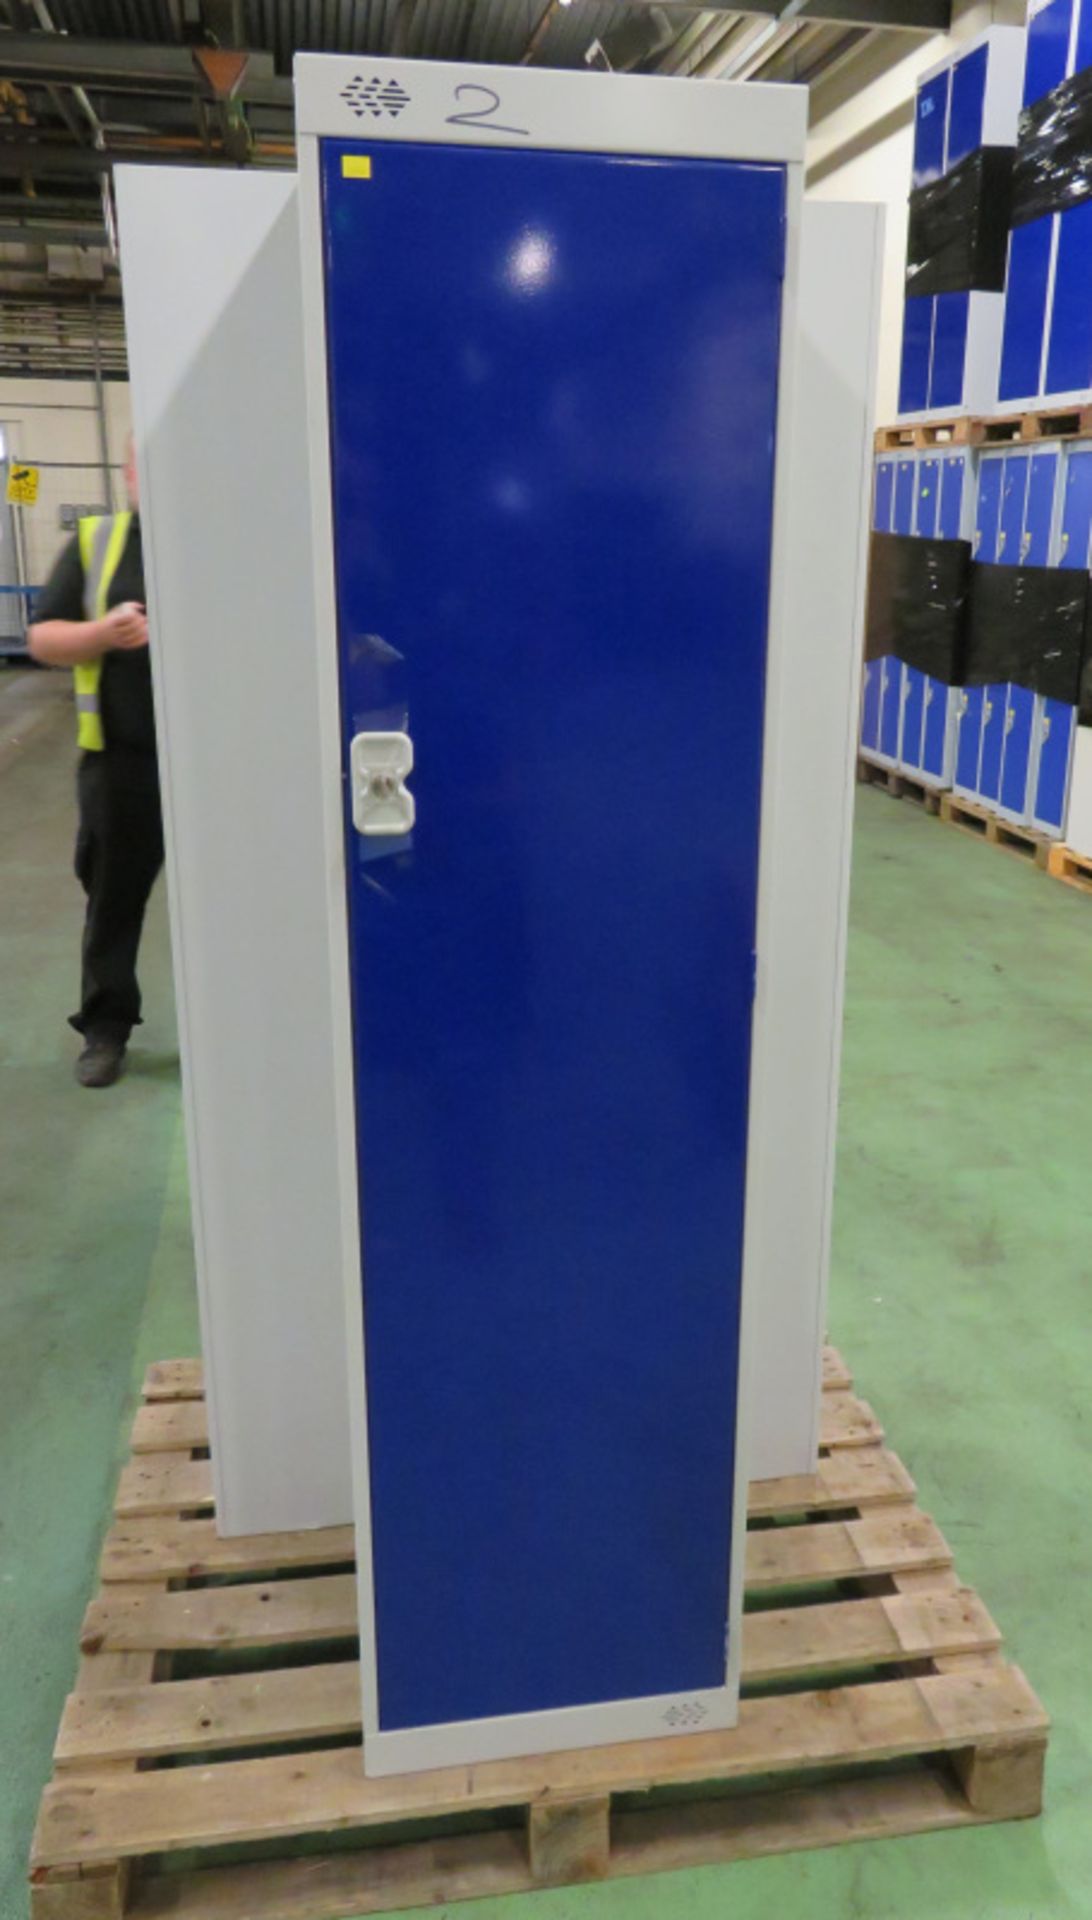 3x Metal Grey / Blue Lockers L 450mm x W 450mm x H1800mm - Image 4 of 6